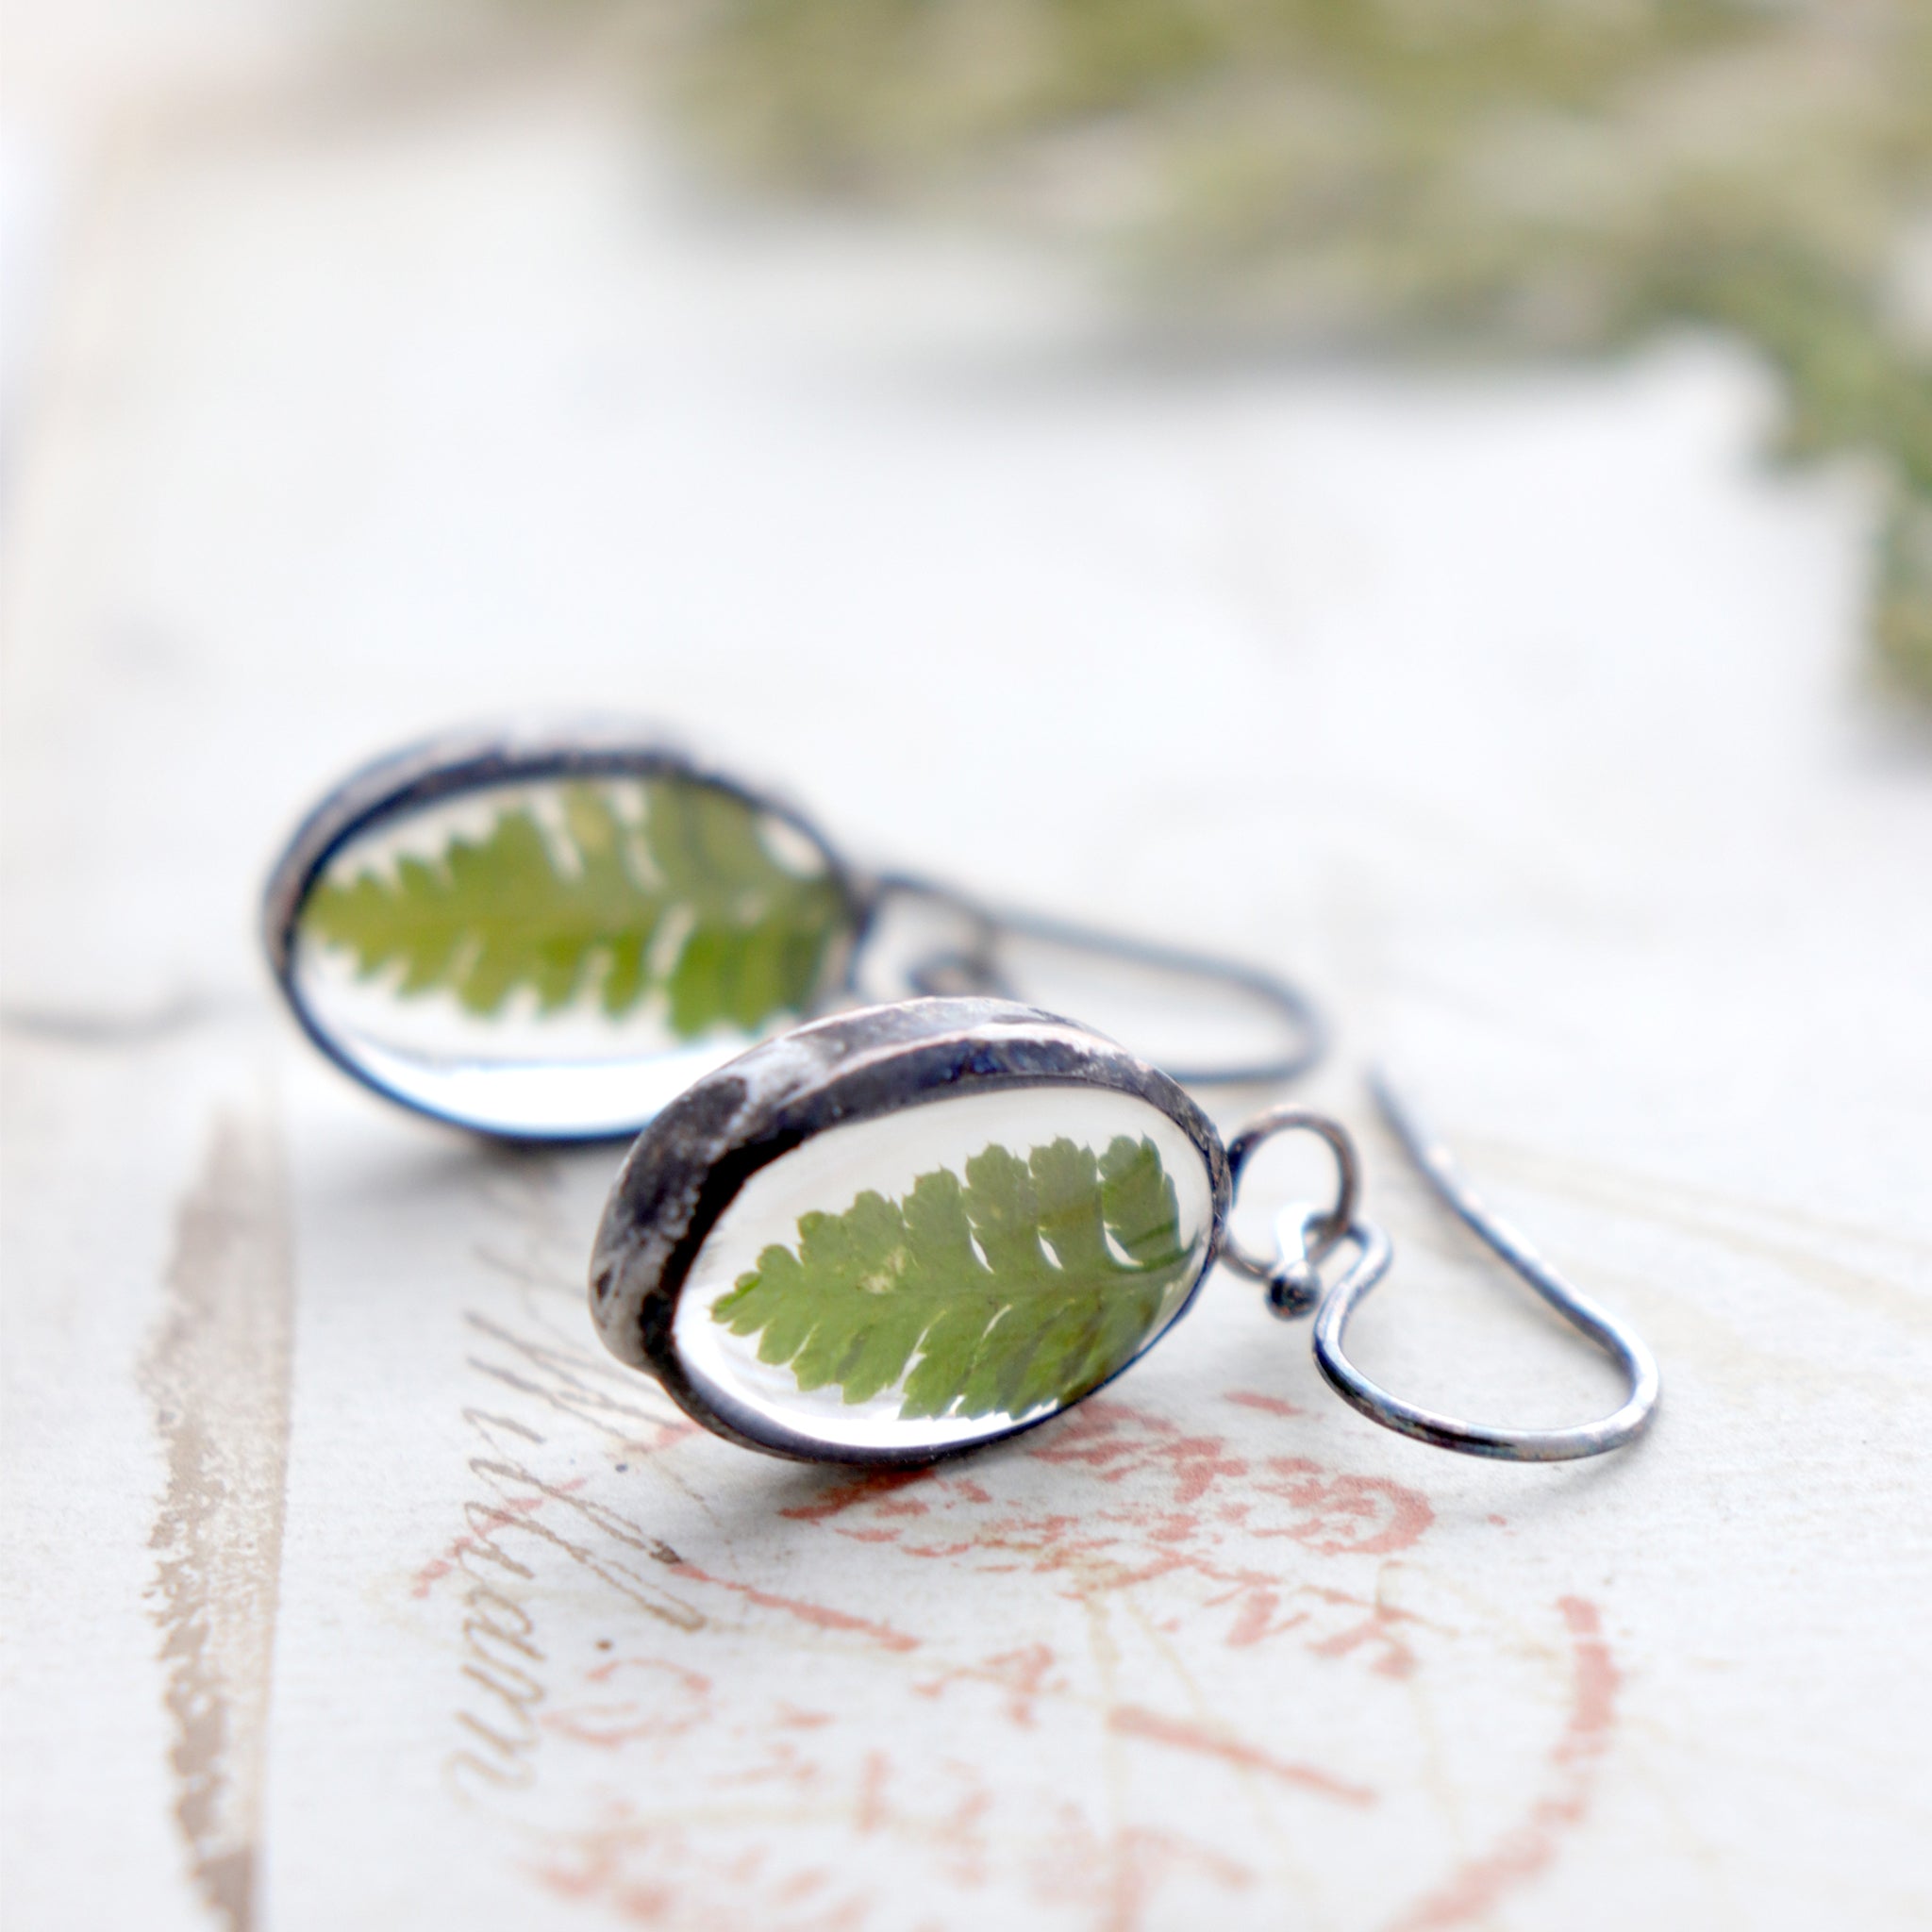 Earrings with real fern lying on an old letter